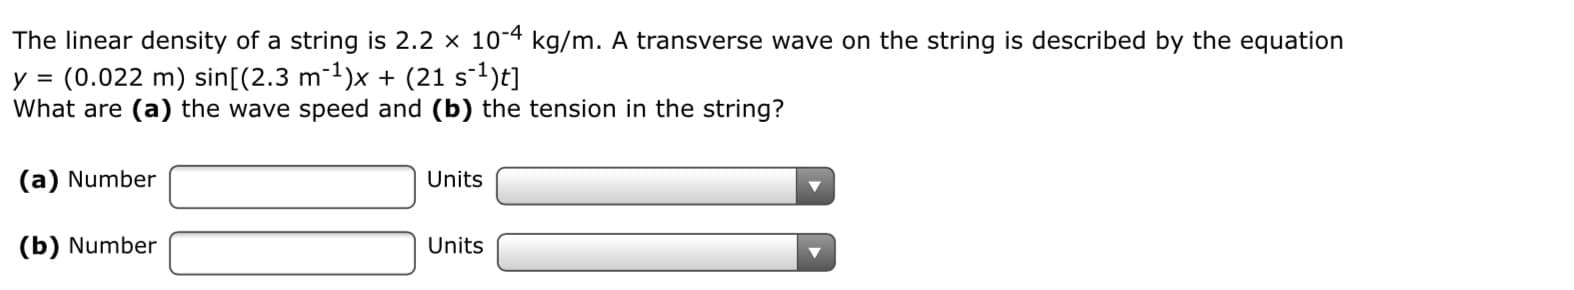 The linear density of a string is 2.2 x 10 kg/m. A transverse wave on the string is described by the equation
y = (0.022 m) sin[(2.3 m1)x + (21 s)
What are (a) the wave speed and (b) the tension in the string?
